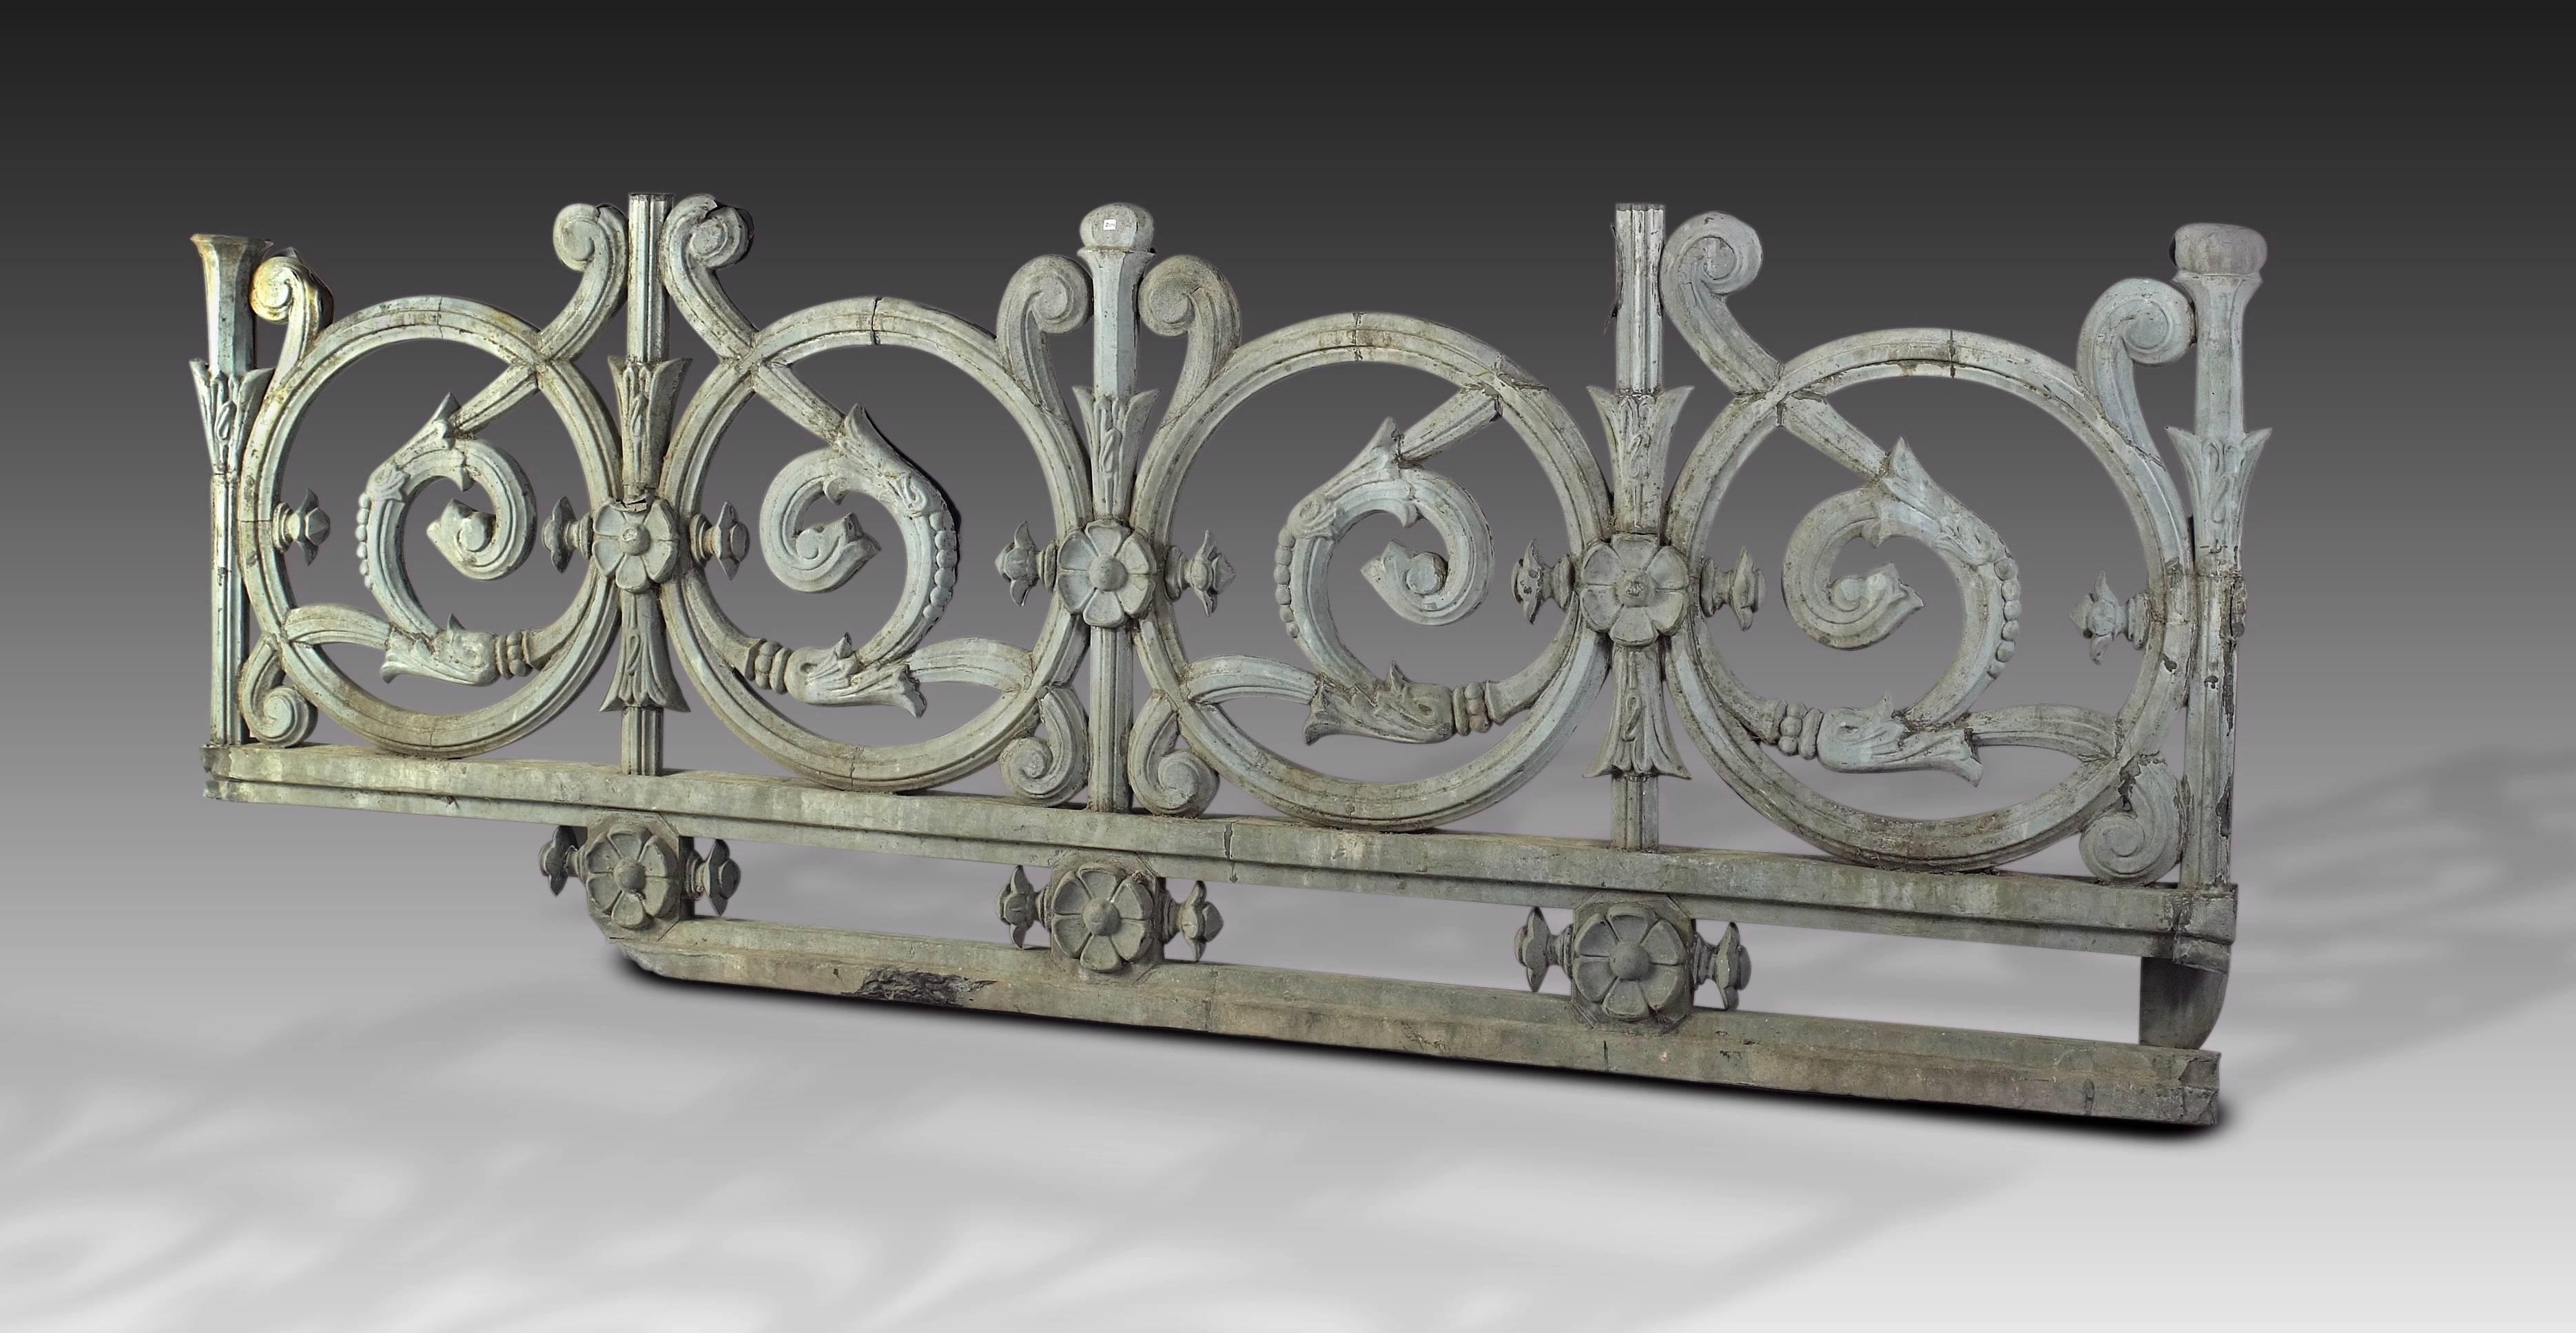 Very exceptional pair of railings, part of rooftop, zinc carved with scrolls, South of France 19th century. Dimensions: W 217 x H 80 cm.